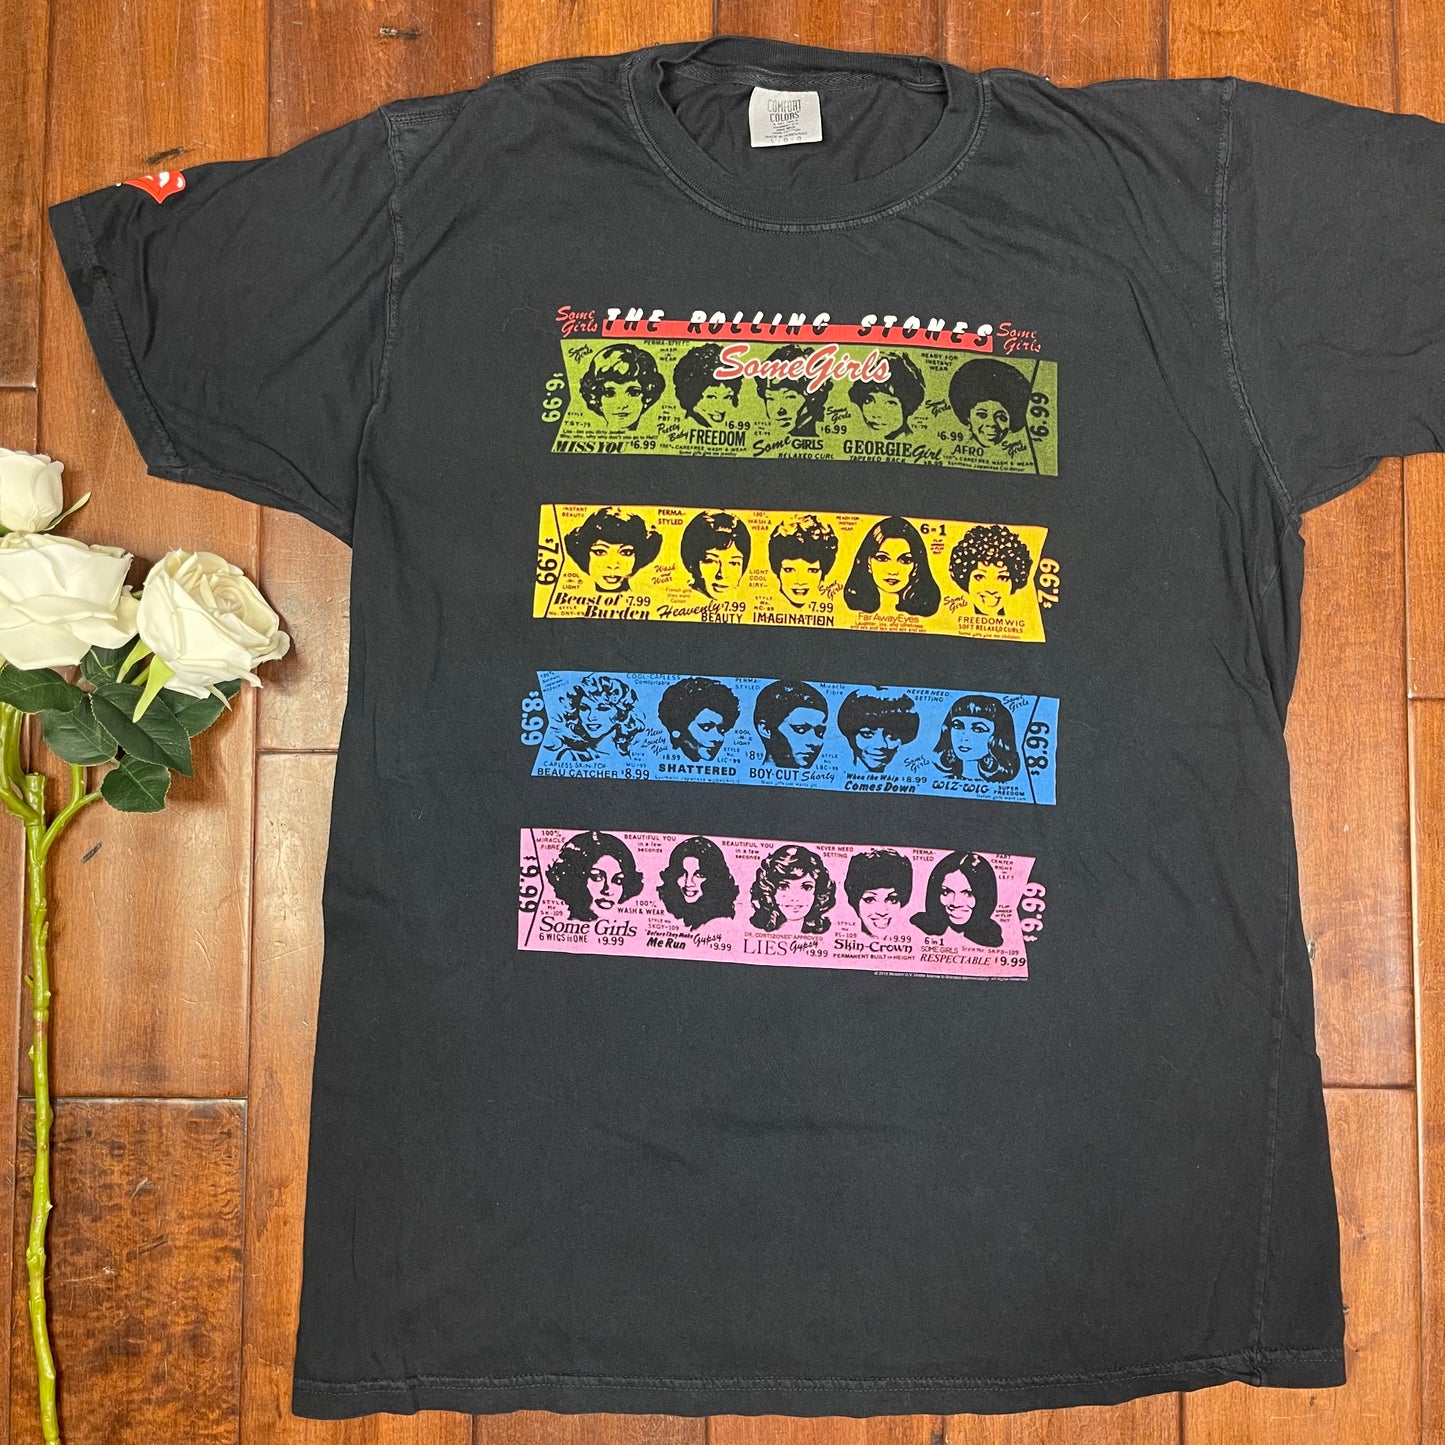 THRIFTED ROLLING STONES “SOME GIRLS” T-SHIRT